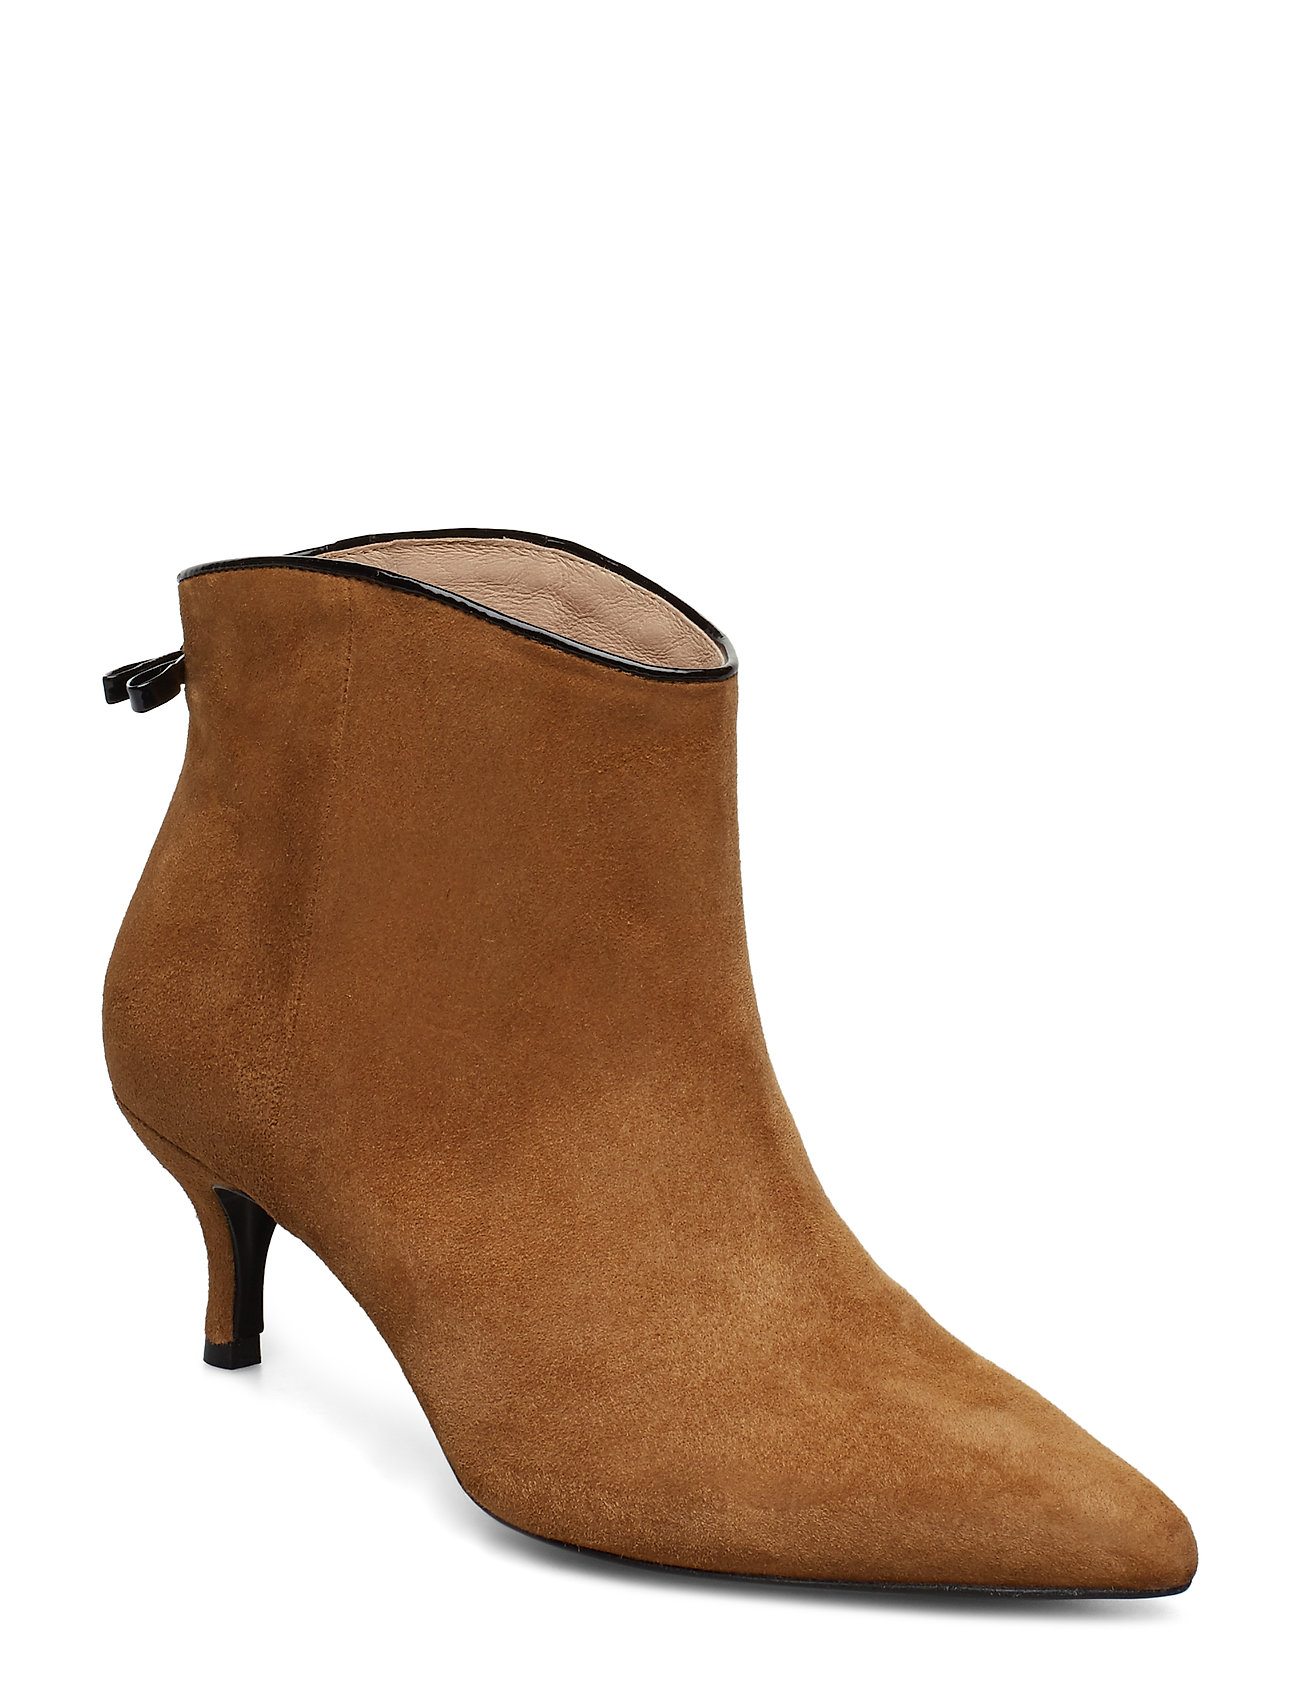 Custommade Casie Suede Shoes Boots Ankle Boot - Heel Brun [Color: CAMEL ][Sex: Women ][Sizes: 36,37,38,39 ]